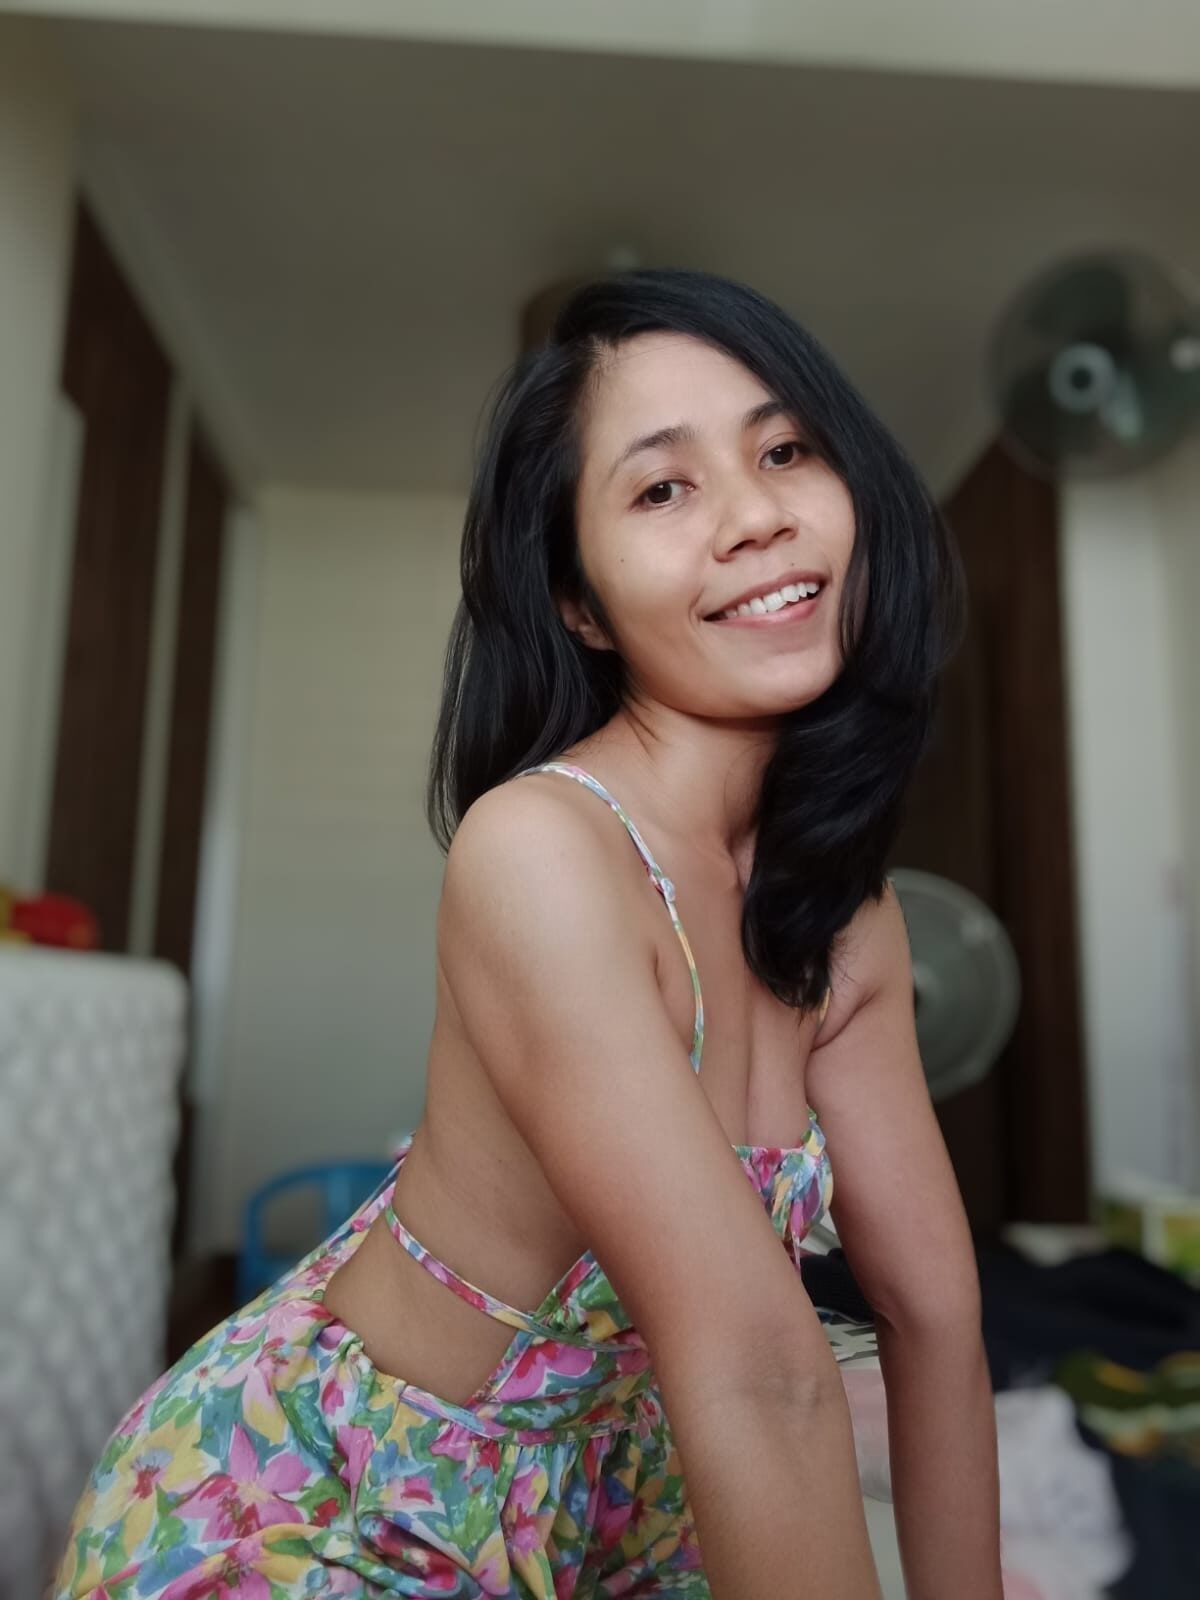 Bali Pussy from Bali Babe #6